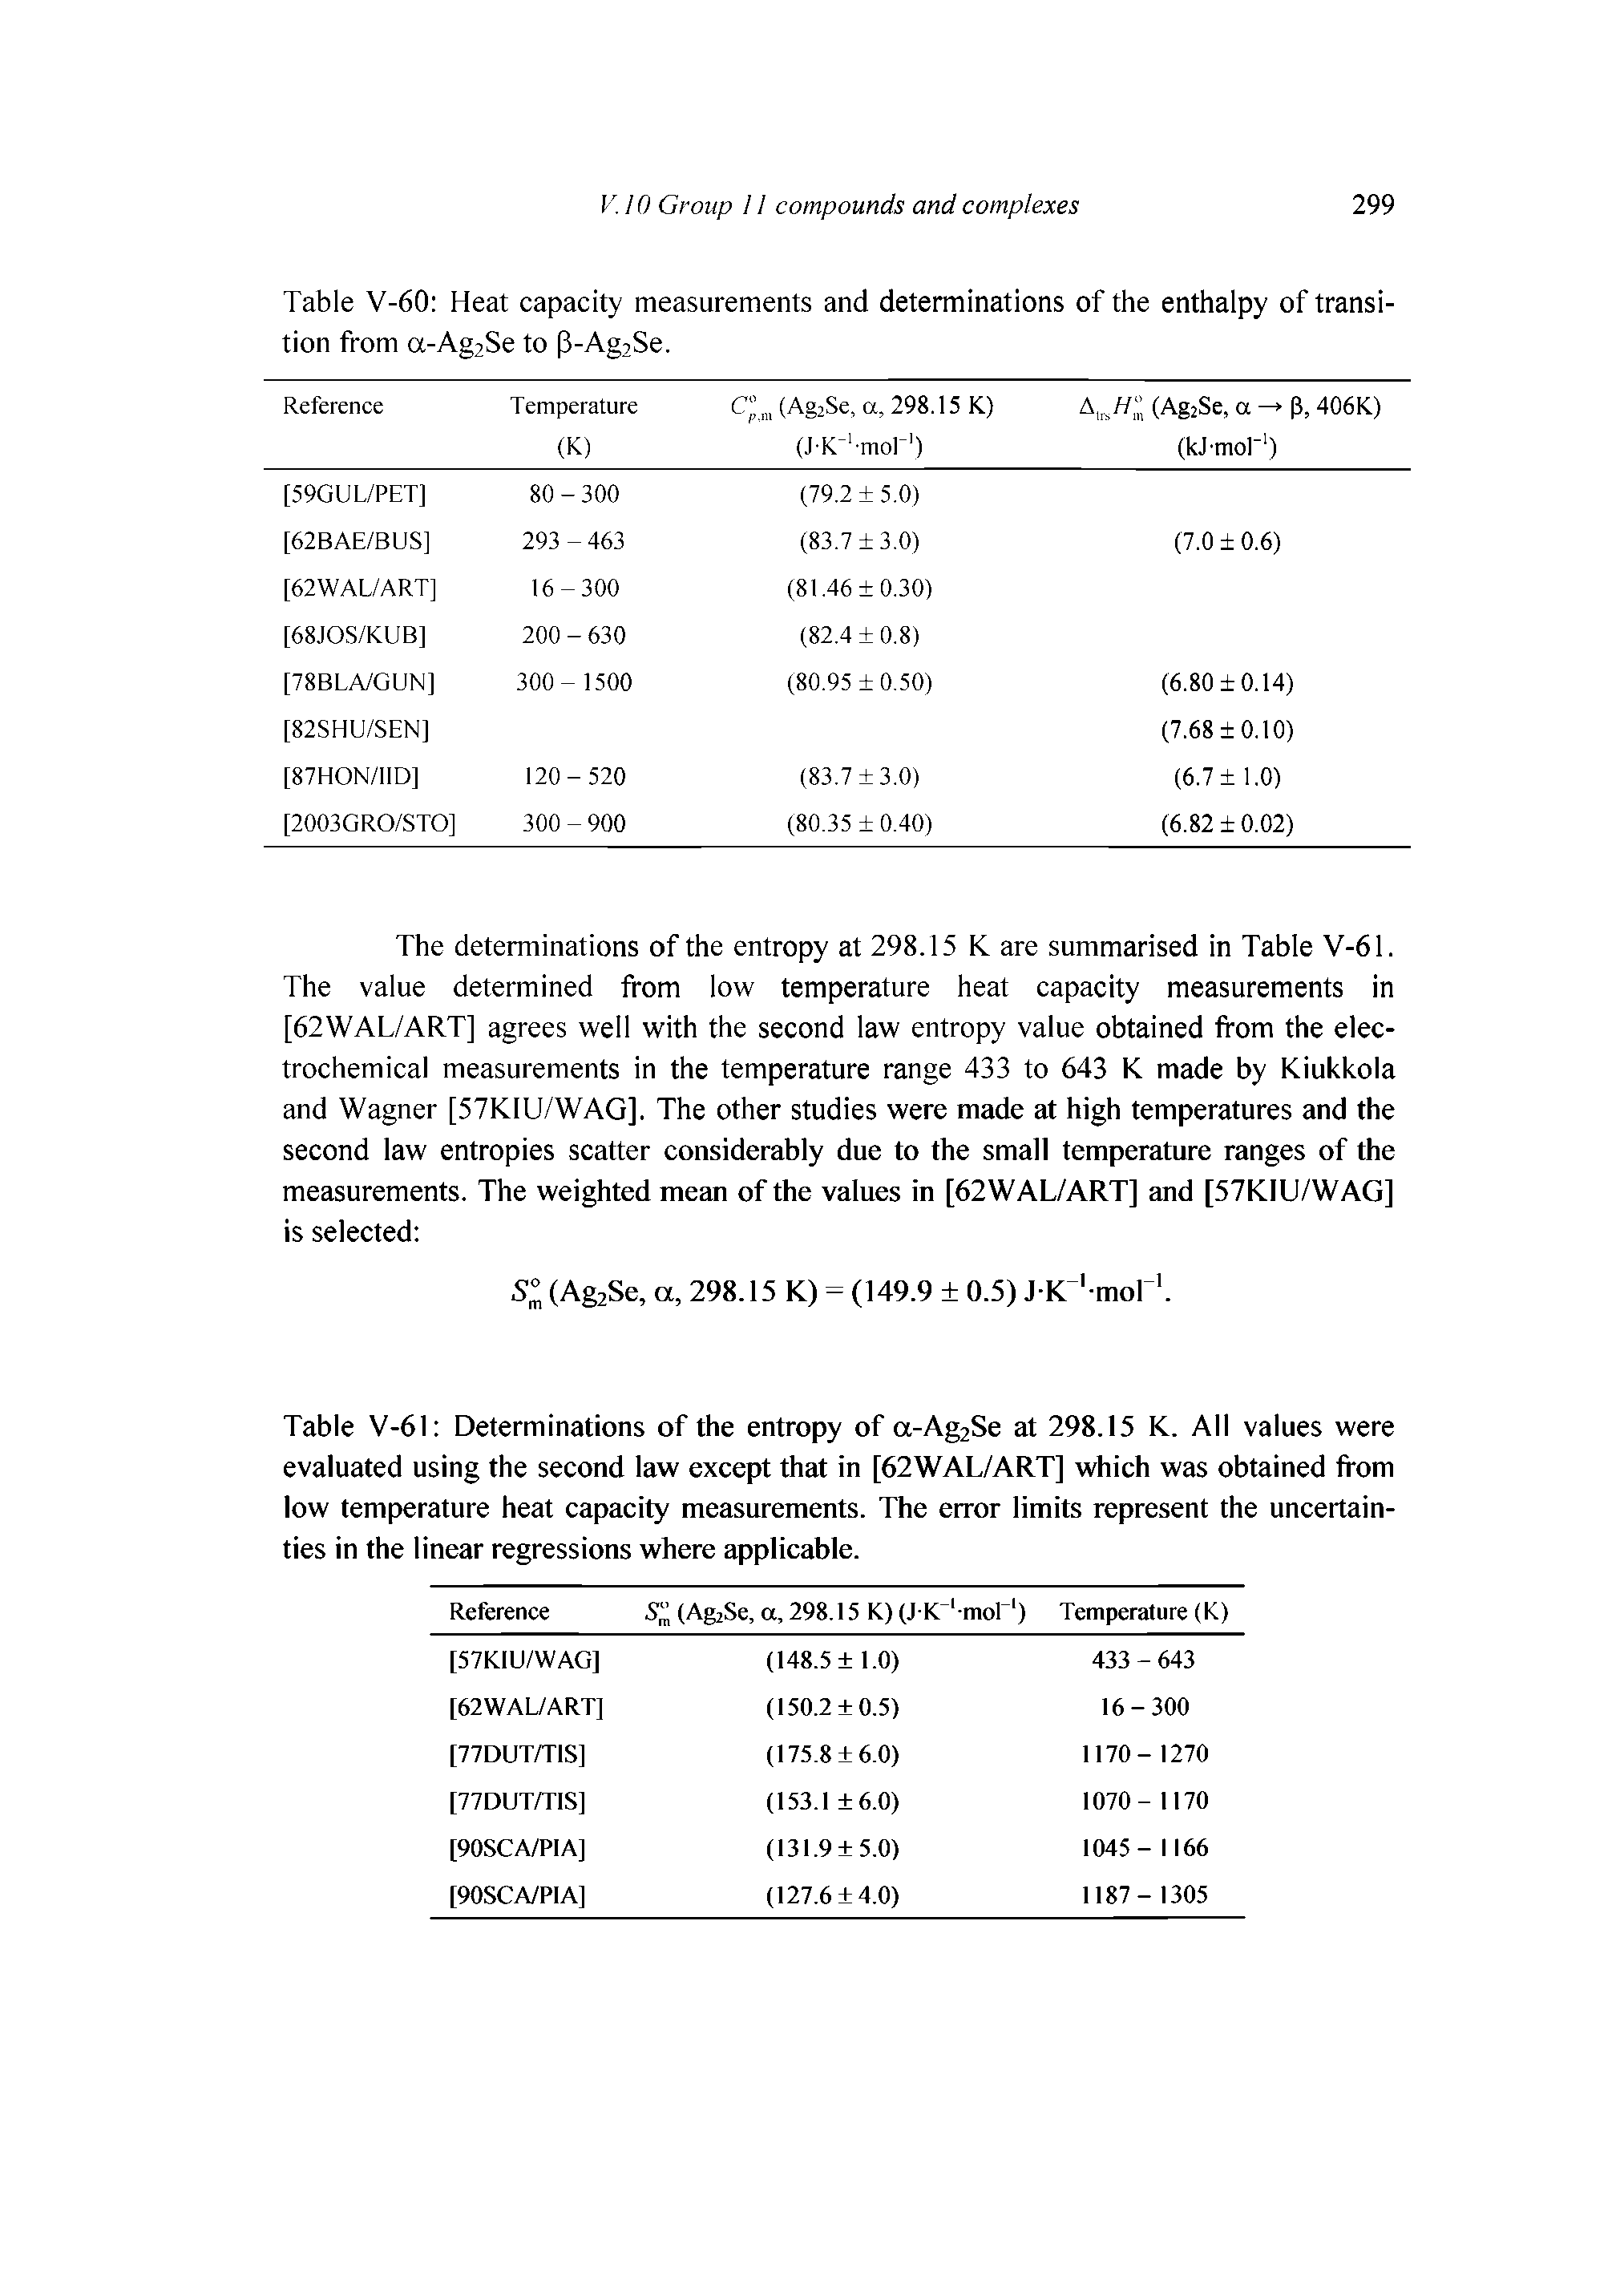 Table V-60 Heat capacity measurements and determinations of the enthalpy of transition from a-Ag2Se to (3-Ag2Se.